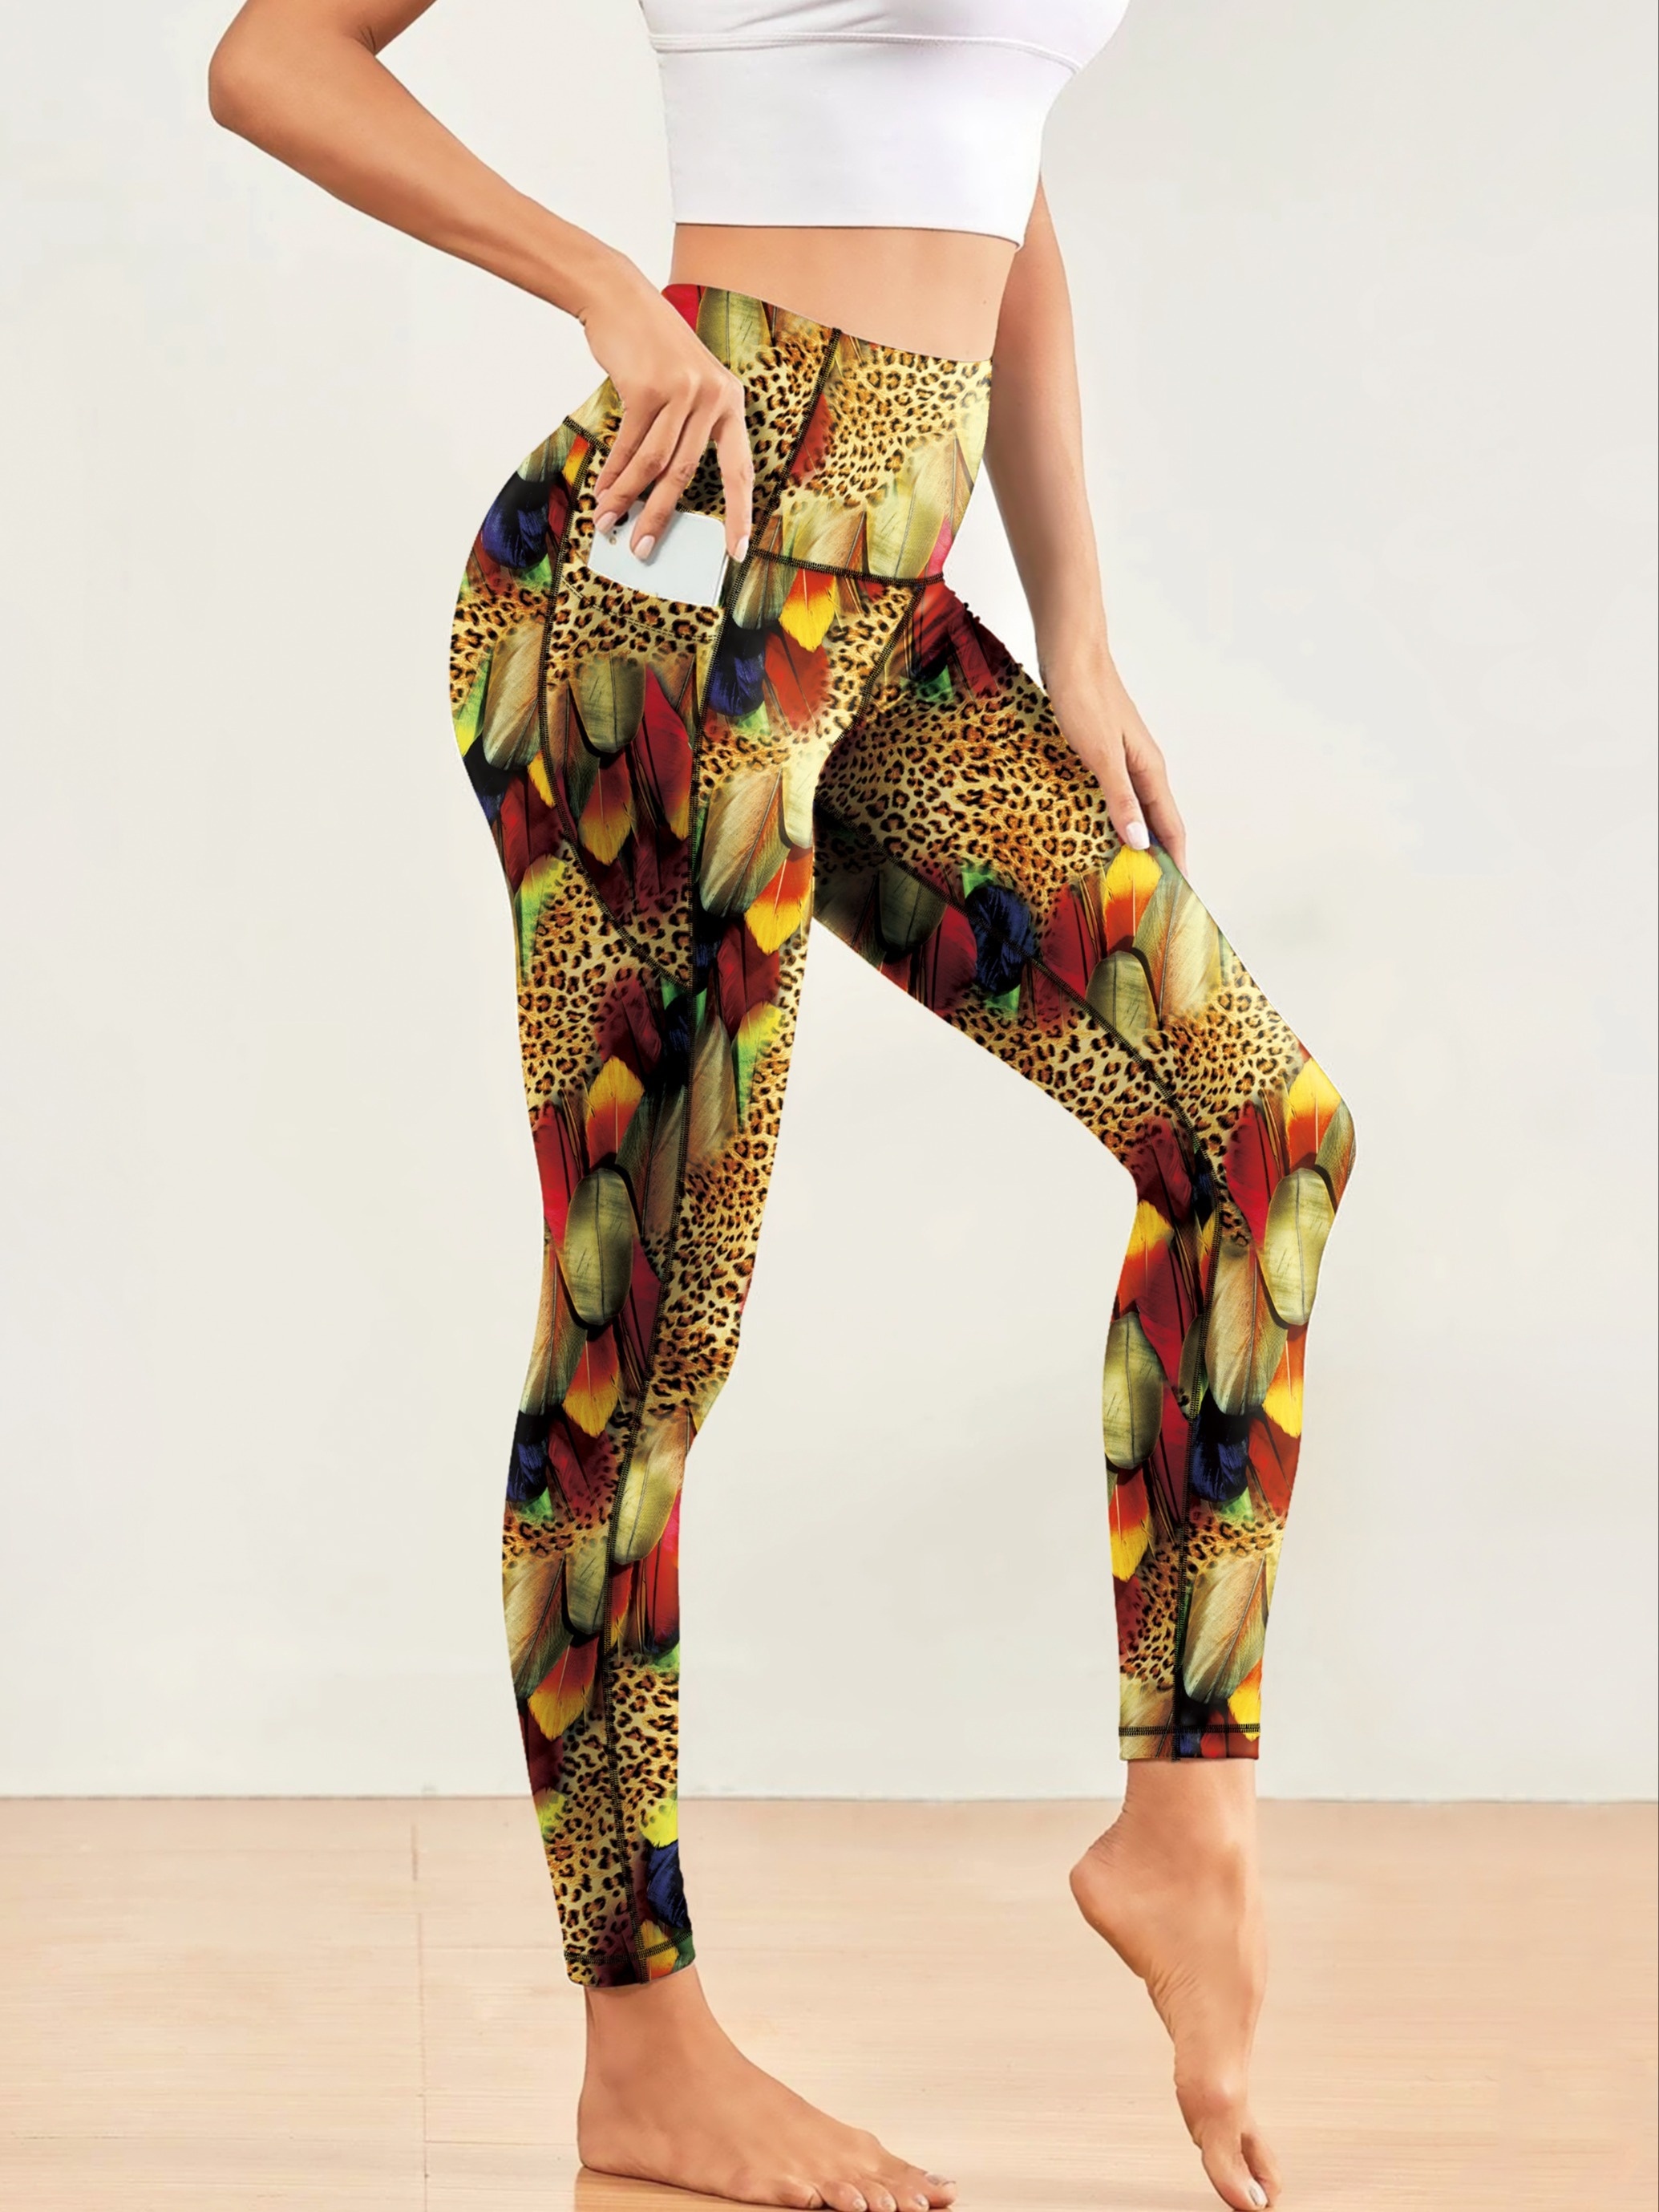 All Over Print Fashion Yoga Pants, Slim Fit High Stretch With Pocket  Workout Leggings, Women's Activewear